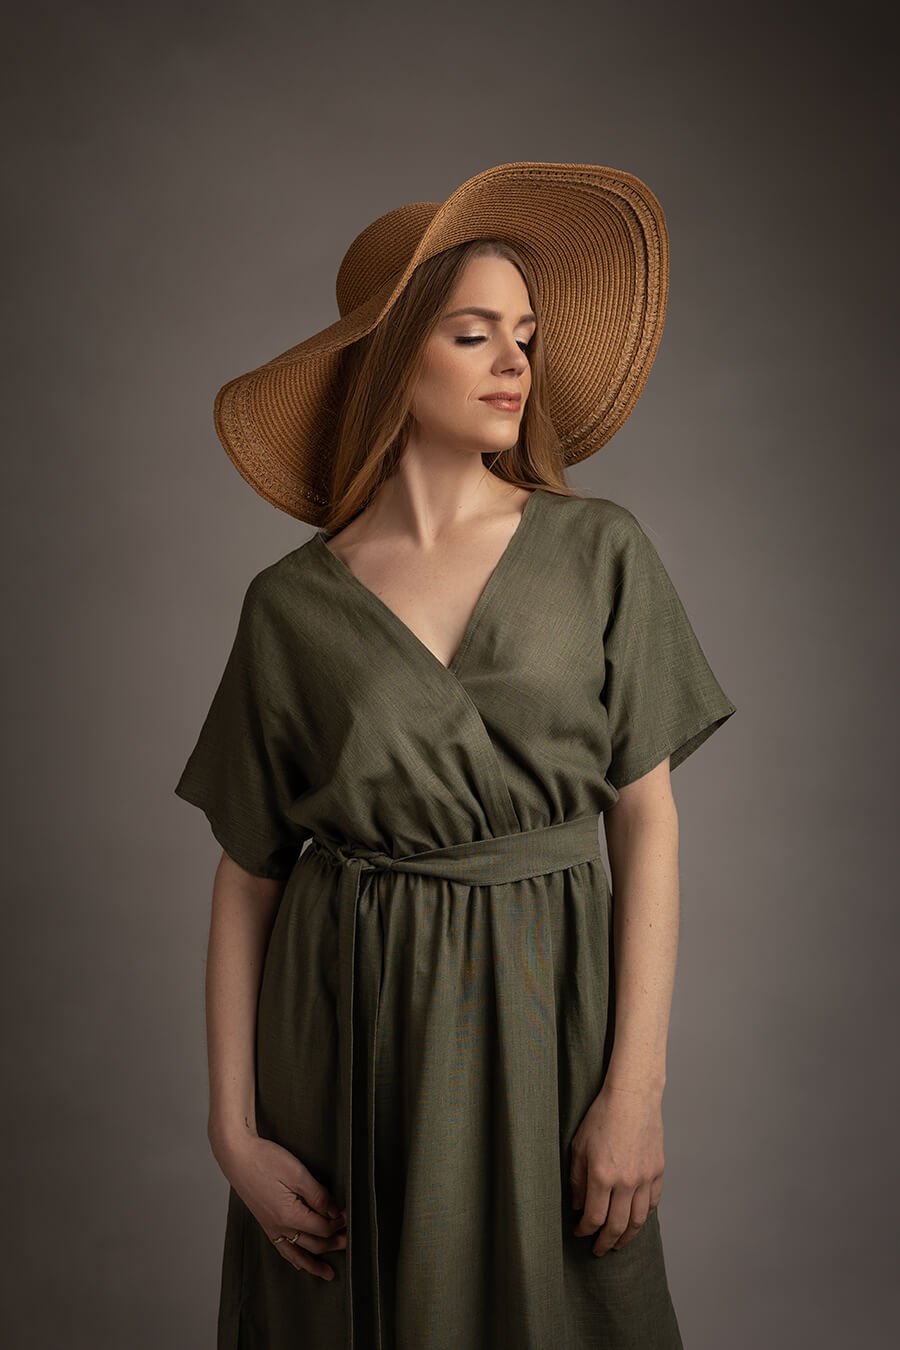 close up of a blond model posing in a studio during a boho western chic photoshoot. she has her eyes closed and wears a brown hat to match the style.